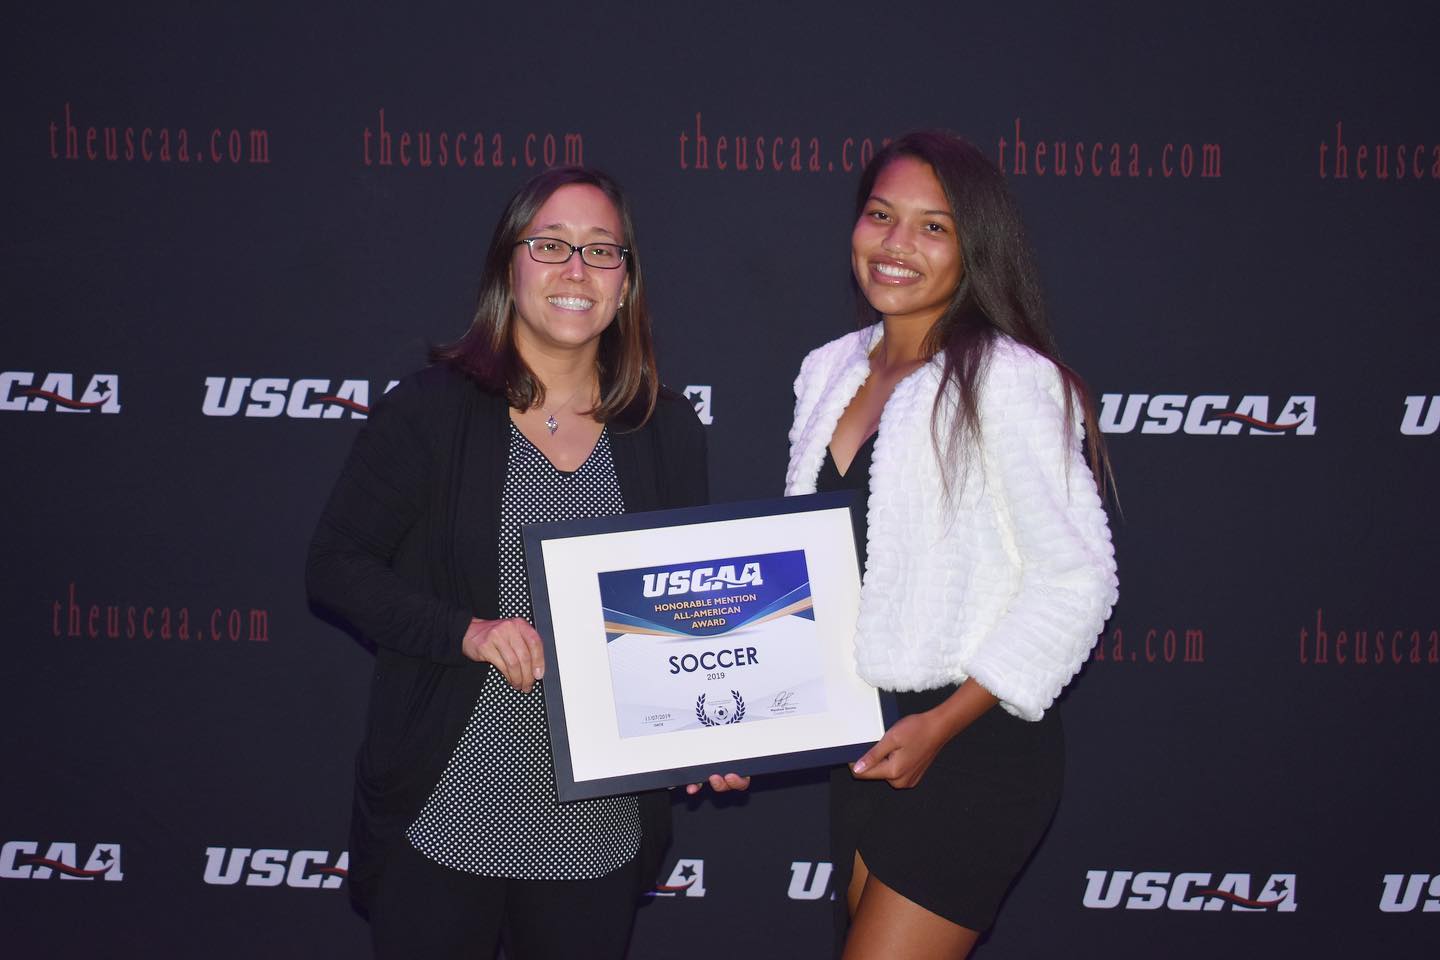 Women's soccer player Dominique Mosley Receiving the All-American second team award